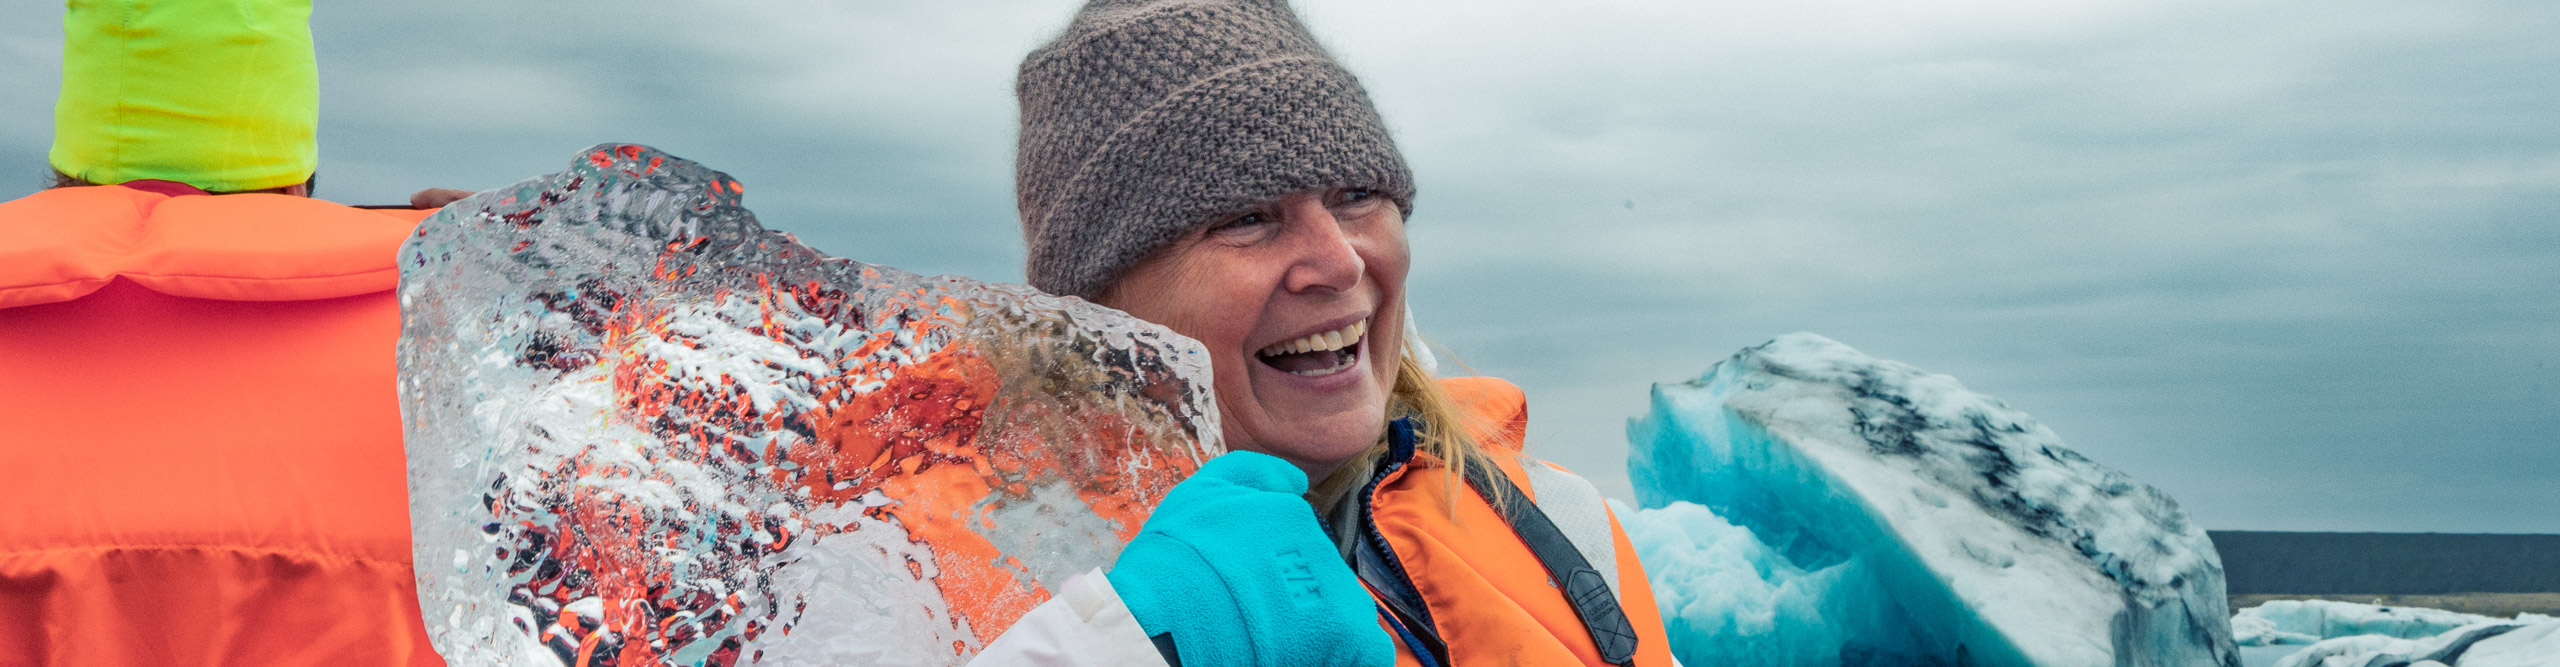 Woman holding a block of ice and laughing in Iceland 